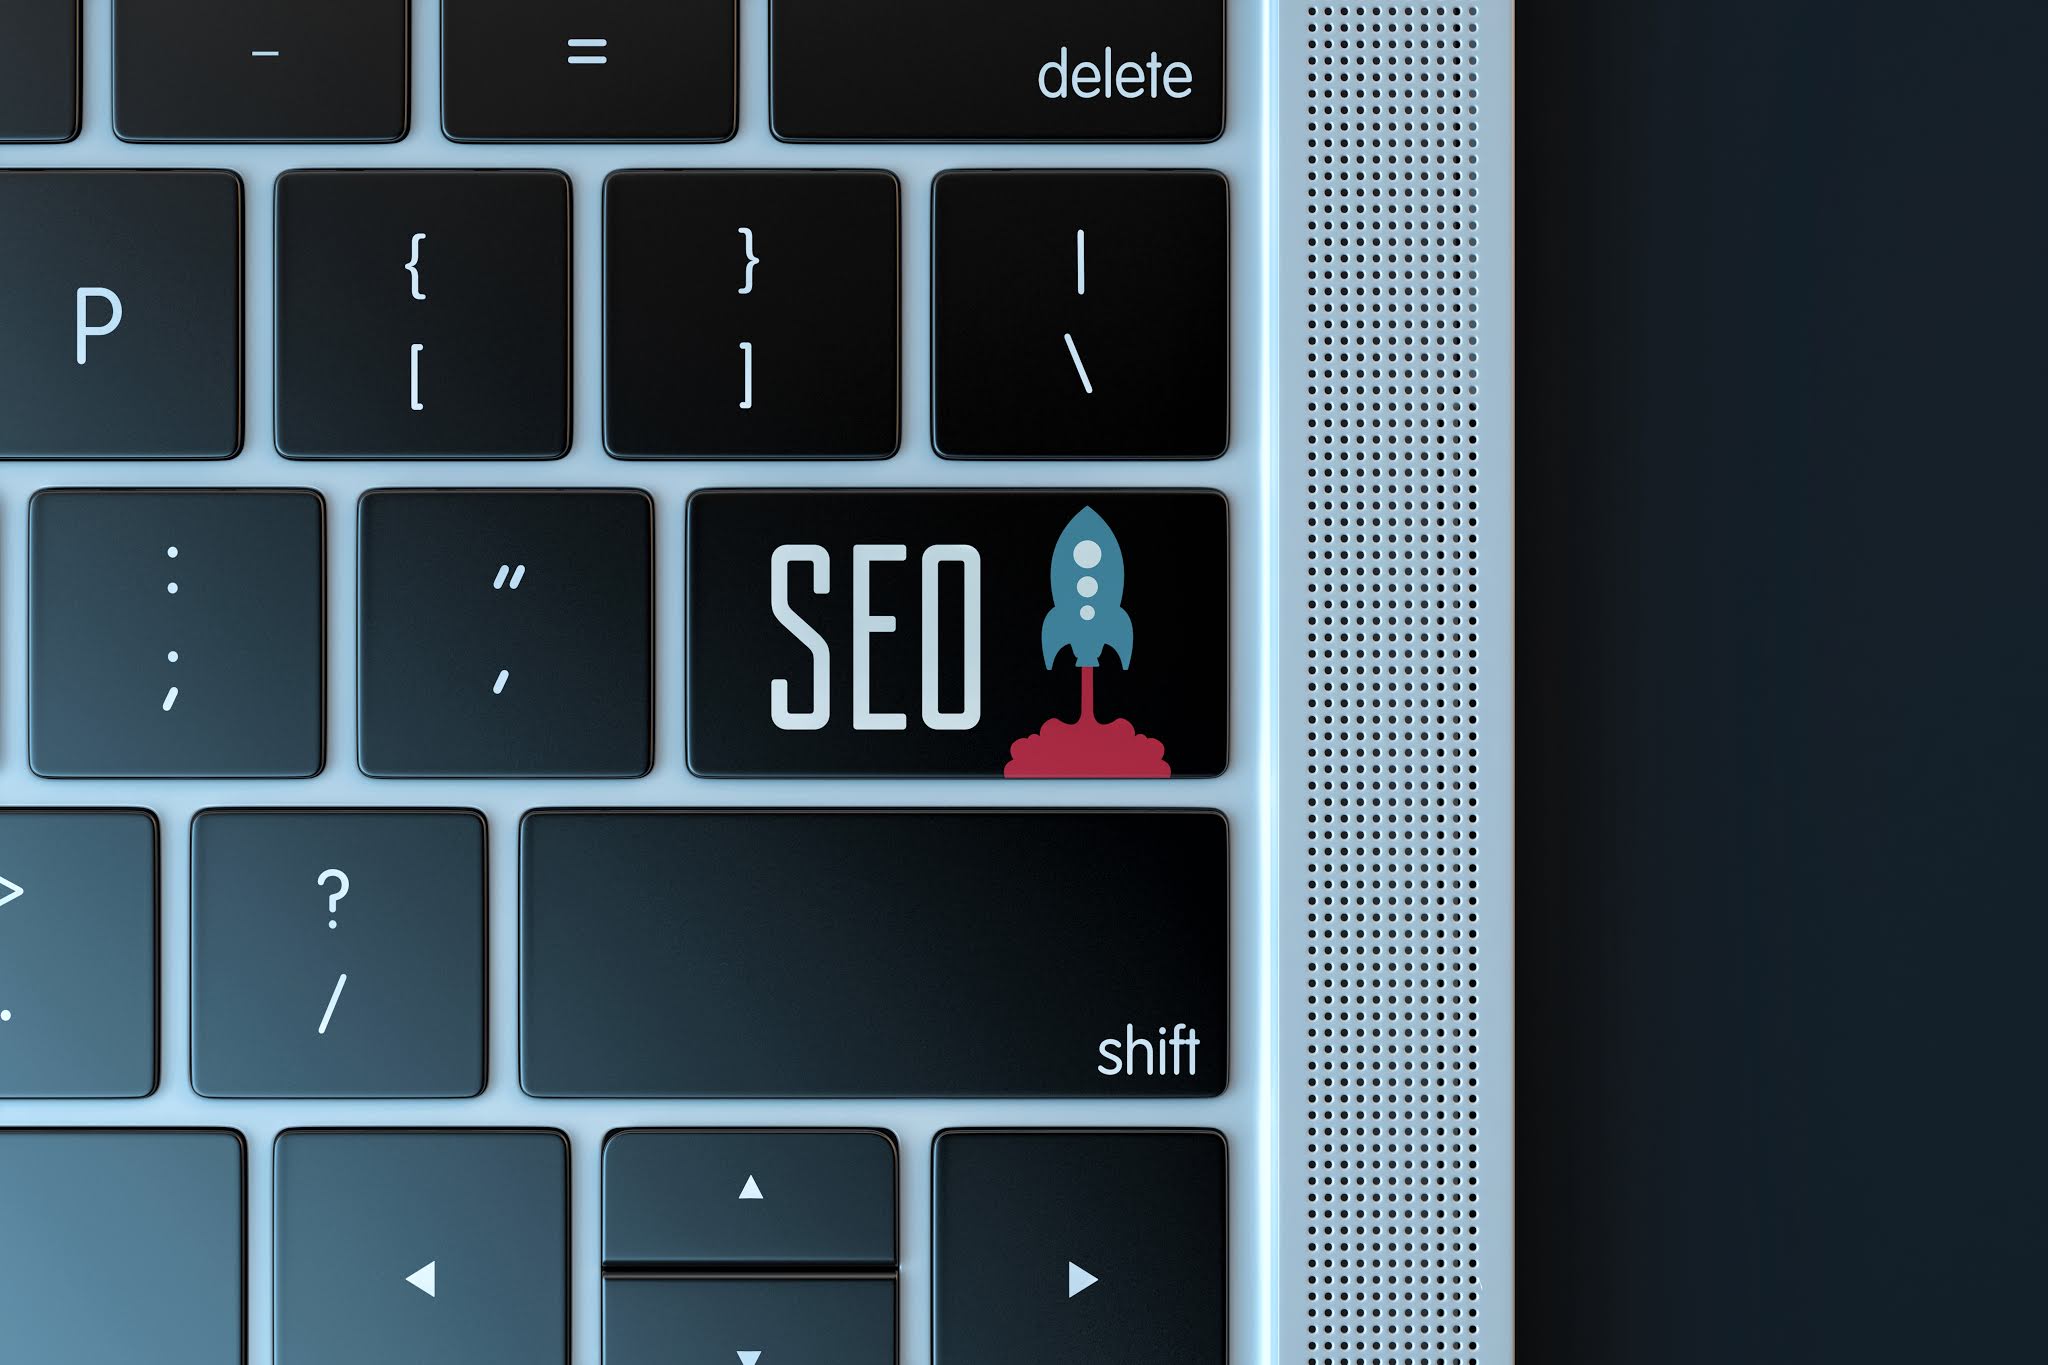 Search engine optimization sign over laptop keyboard